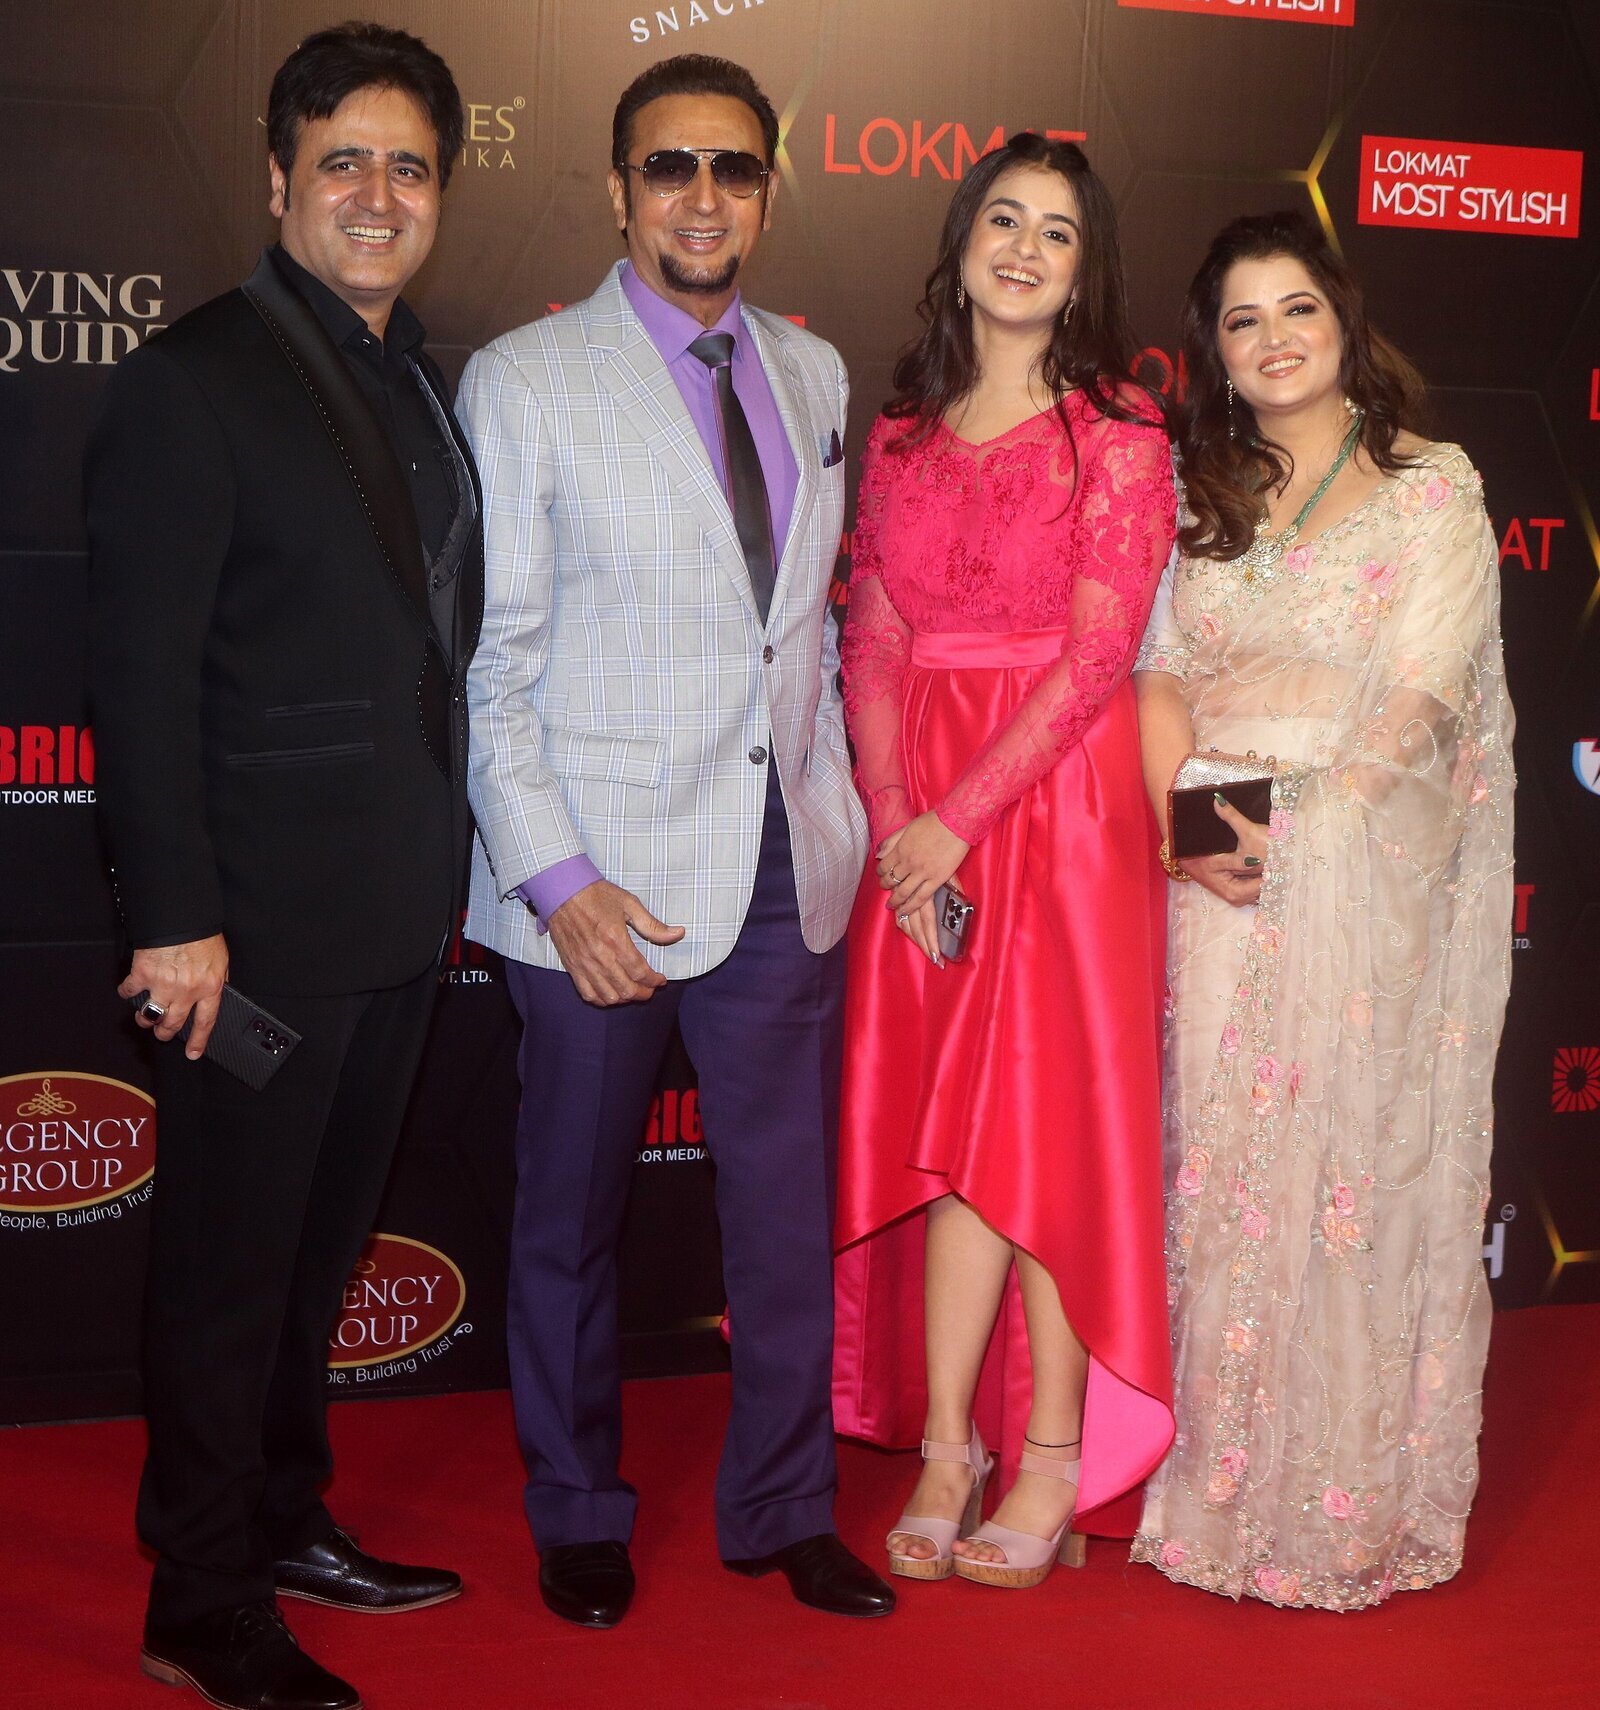 Photos: Celebs At The Lokmat Most Stylish Awards 2021 | Picture 1845780